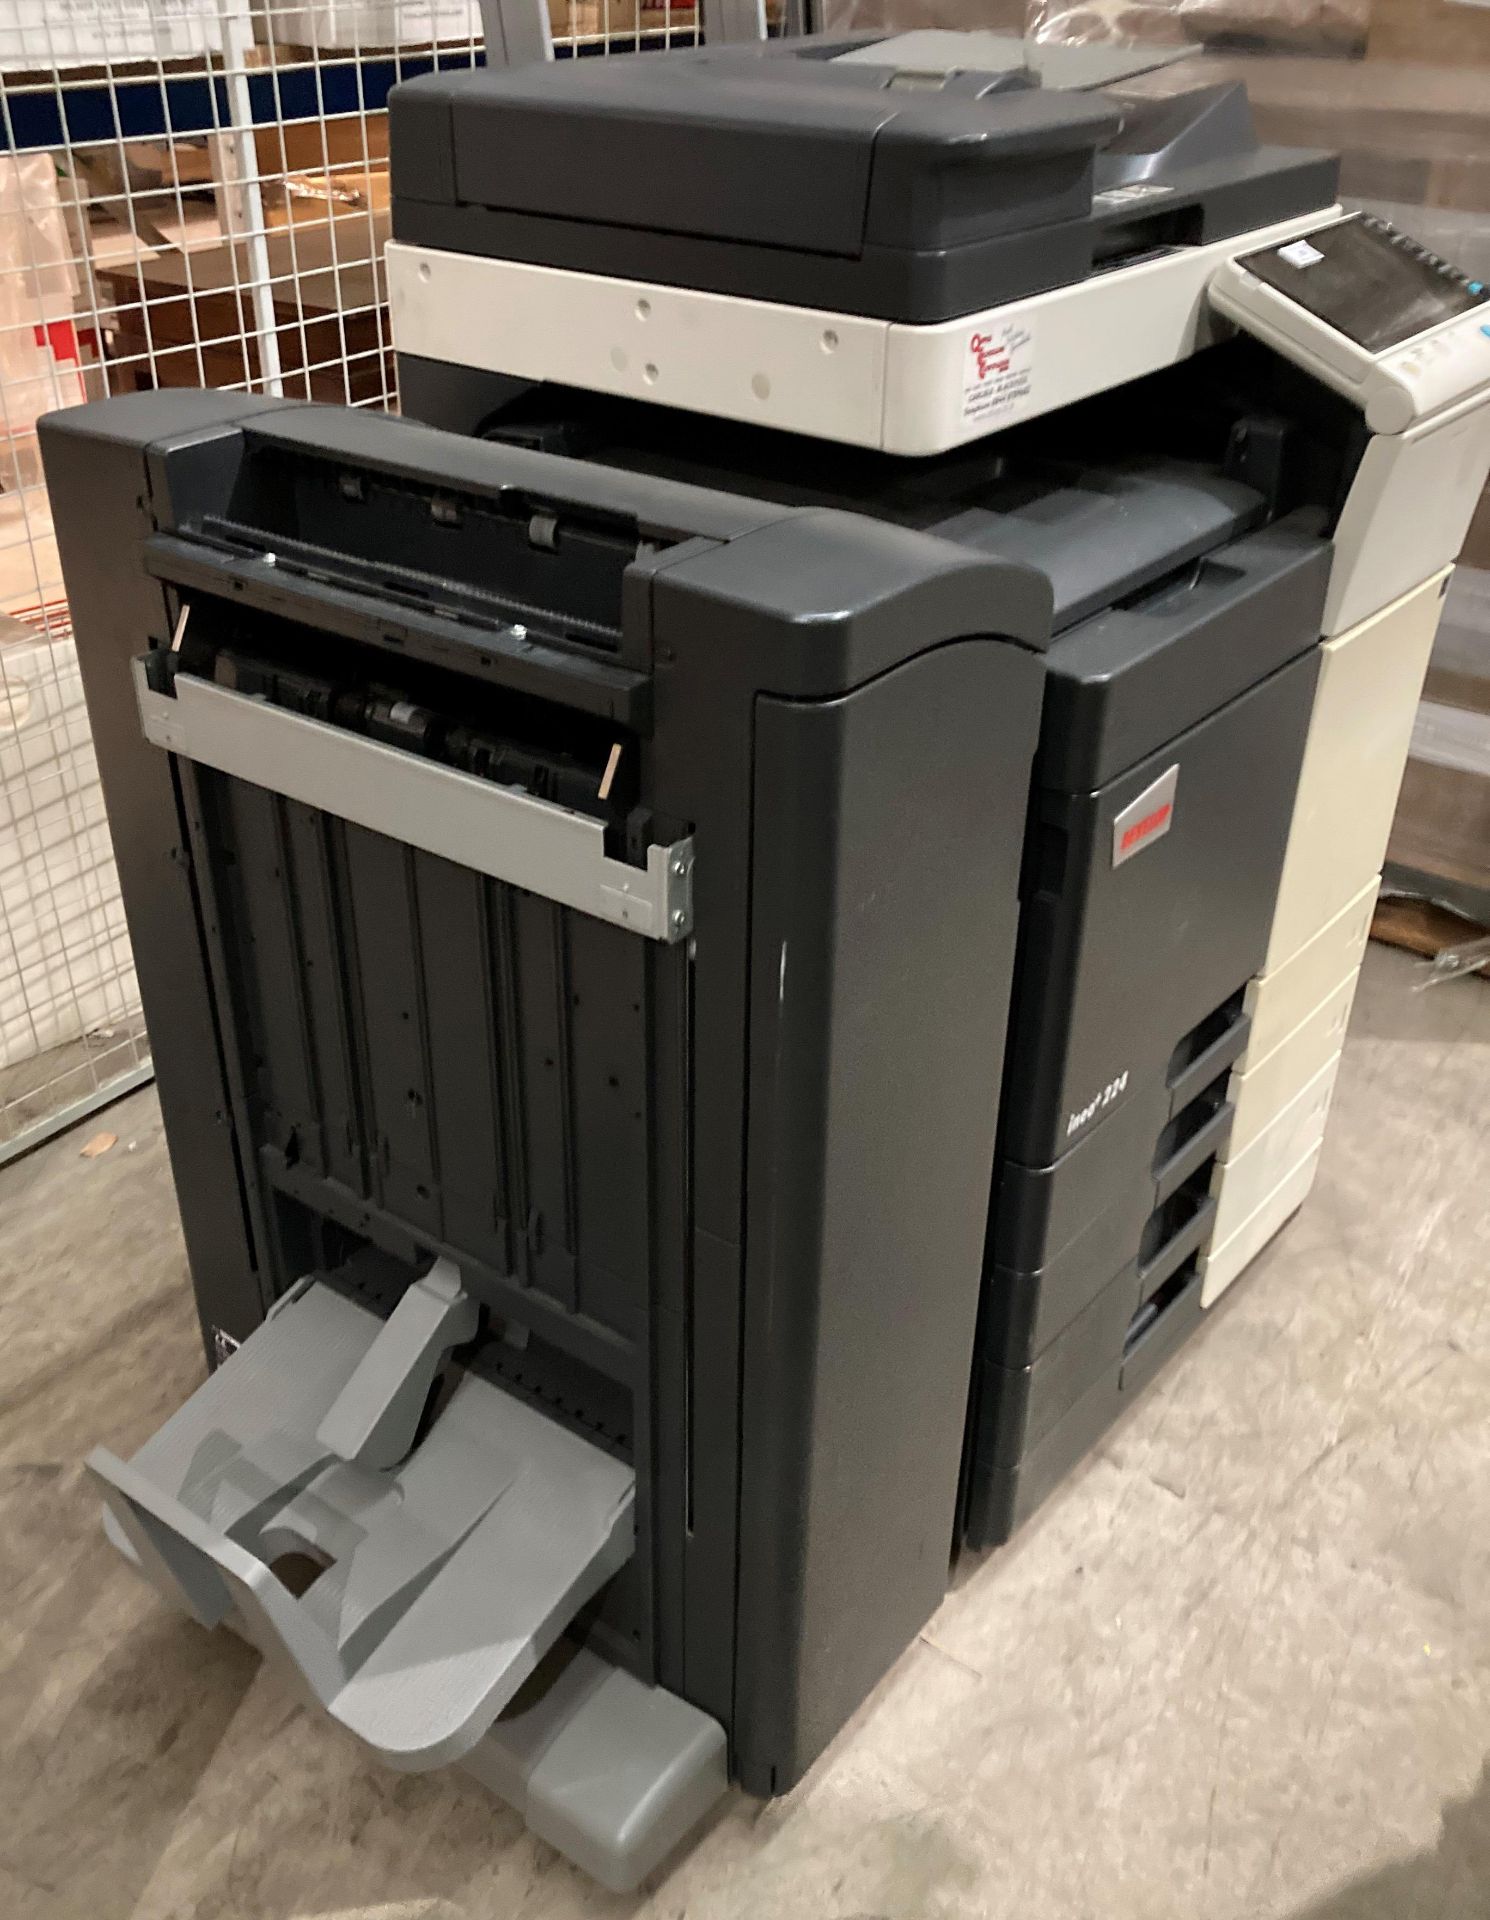 Develop ineo+224 all-in-one copier (OUTSIDE MEZ) - Image 2 of 2